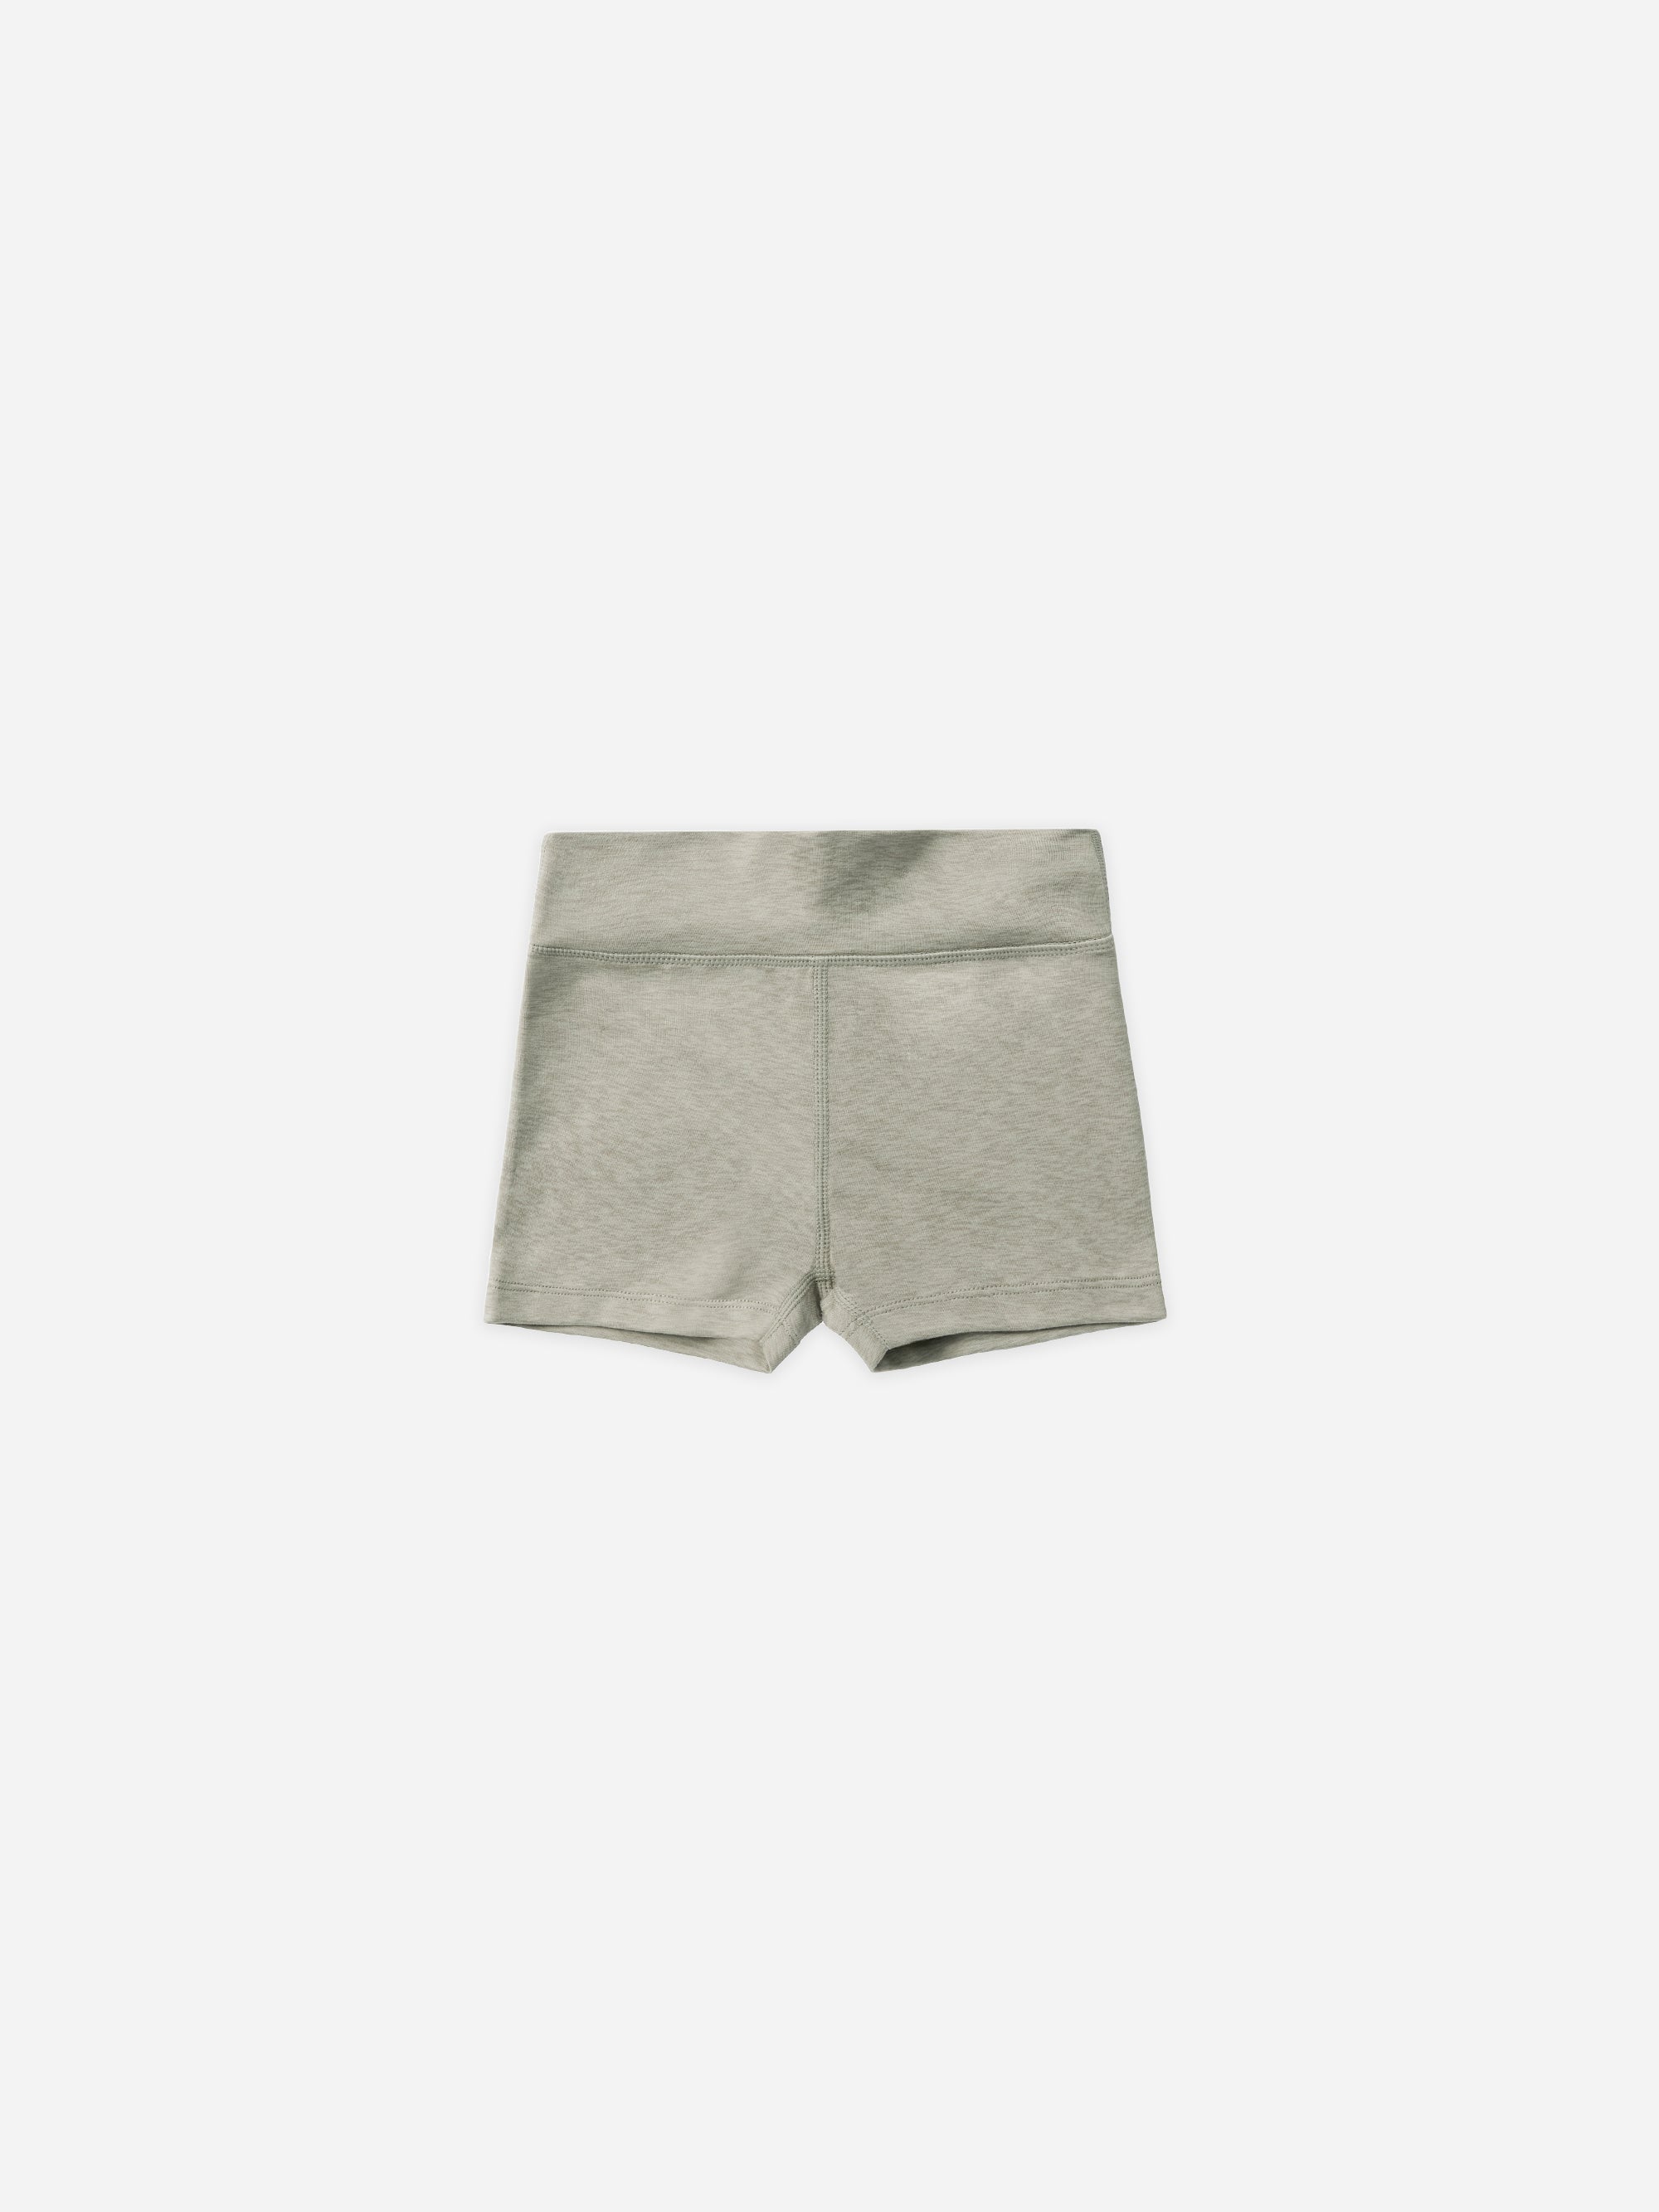 Shortie Short || Heathered Sage - Rylee + Cru | Kids Clothes | Trendy Baby Clothes | Modern Infant Outfits |